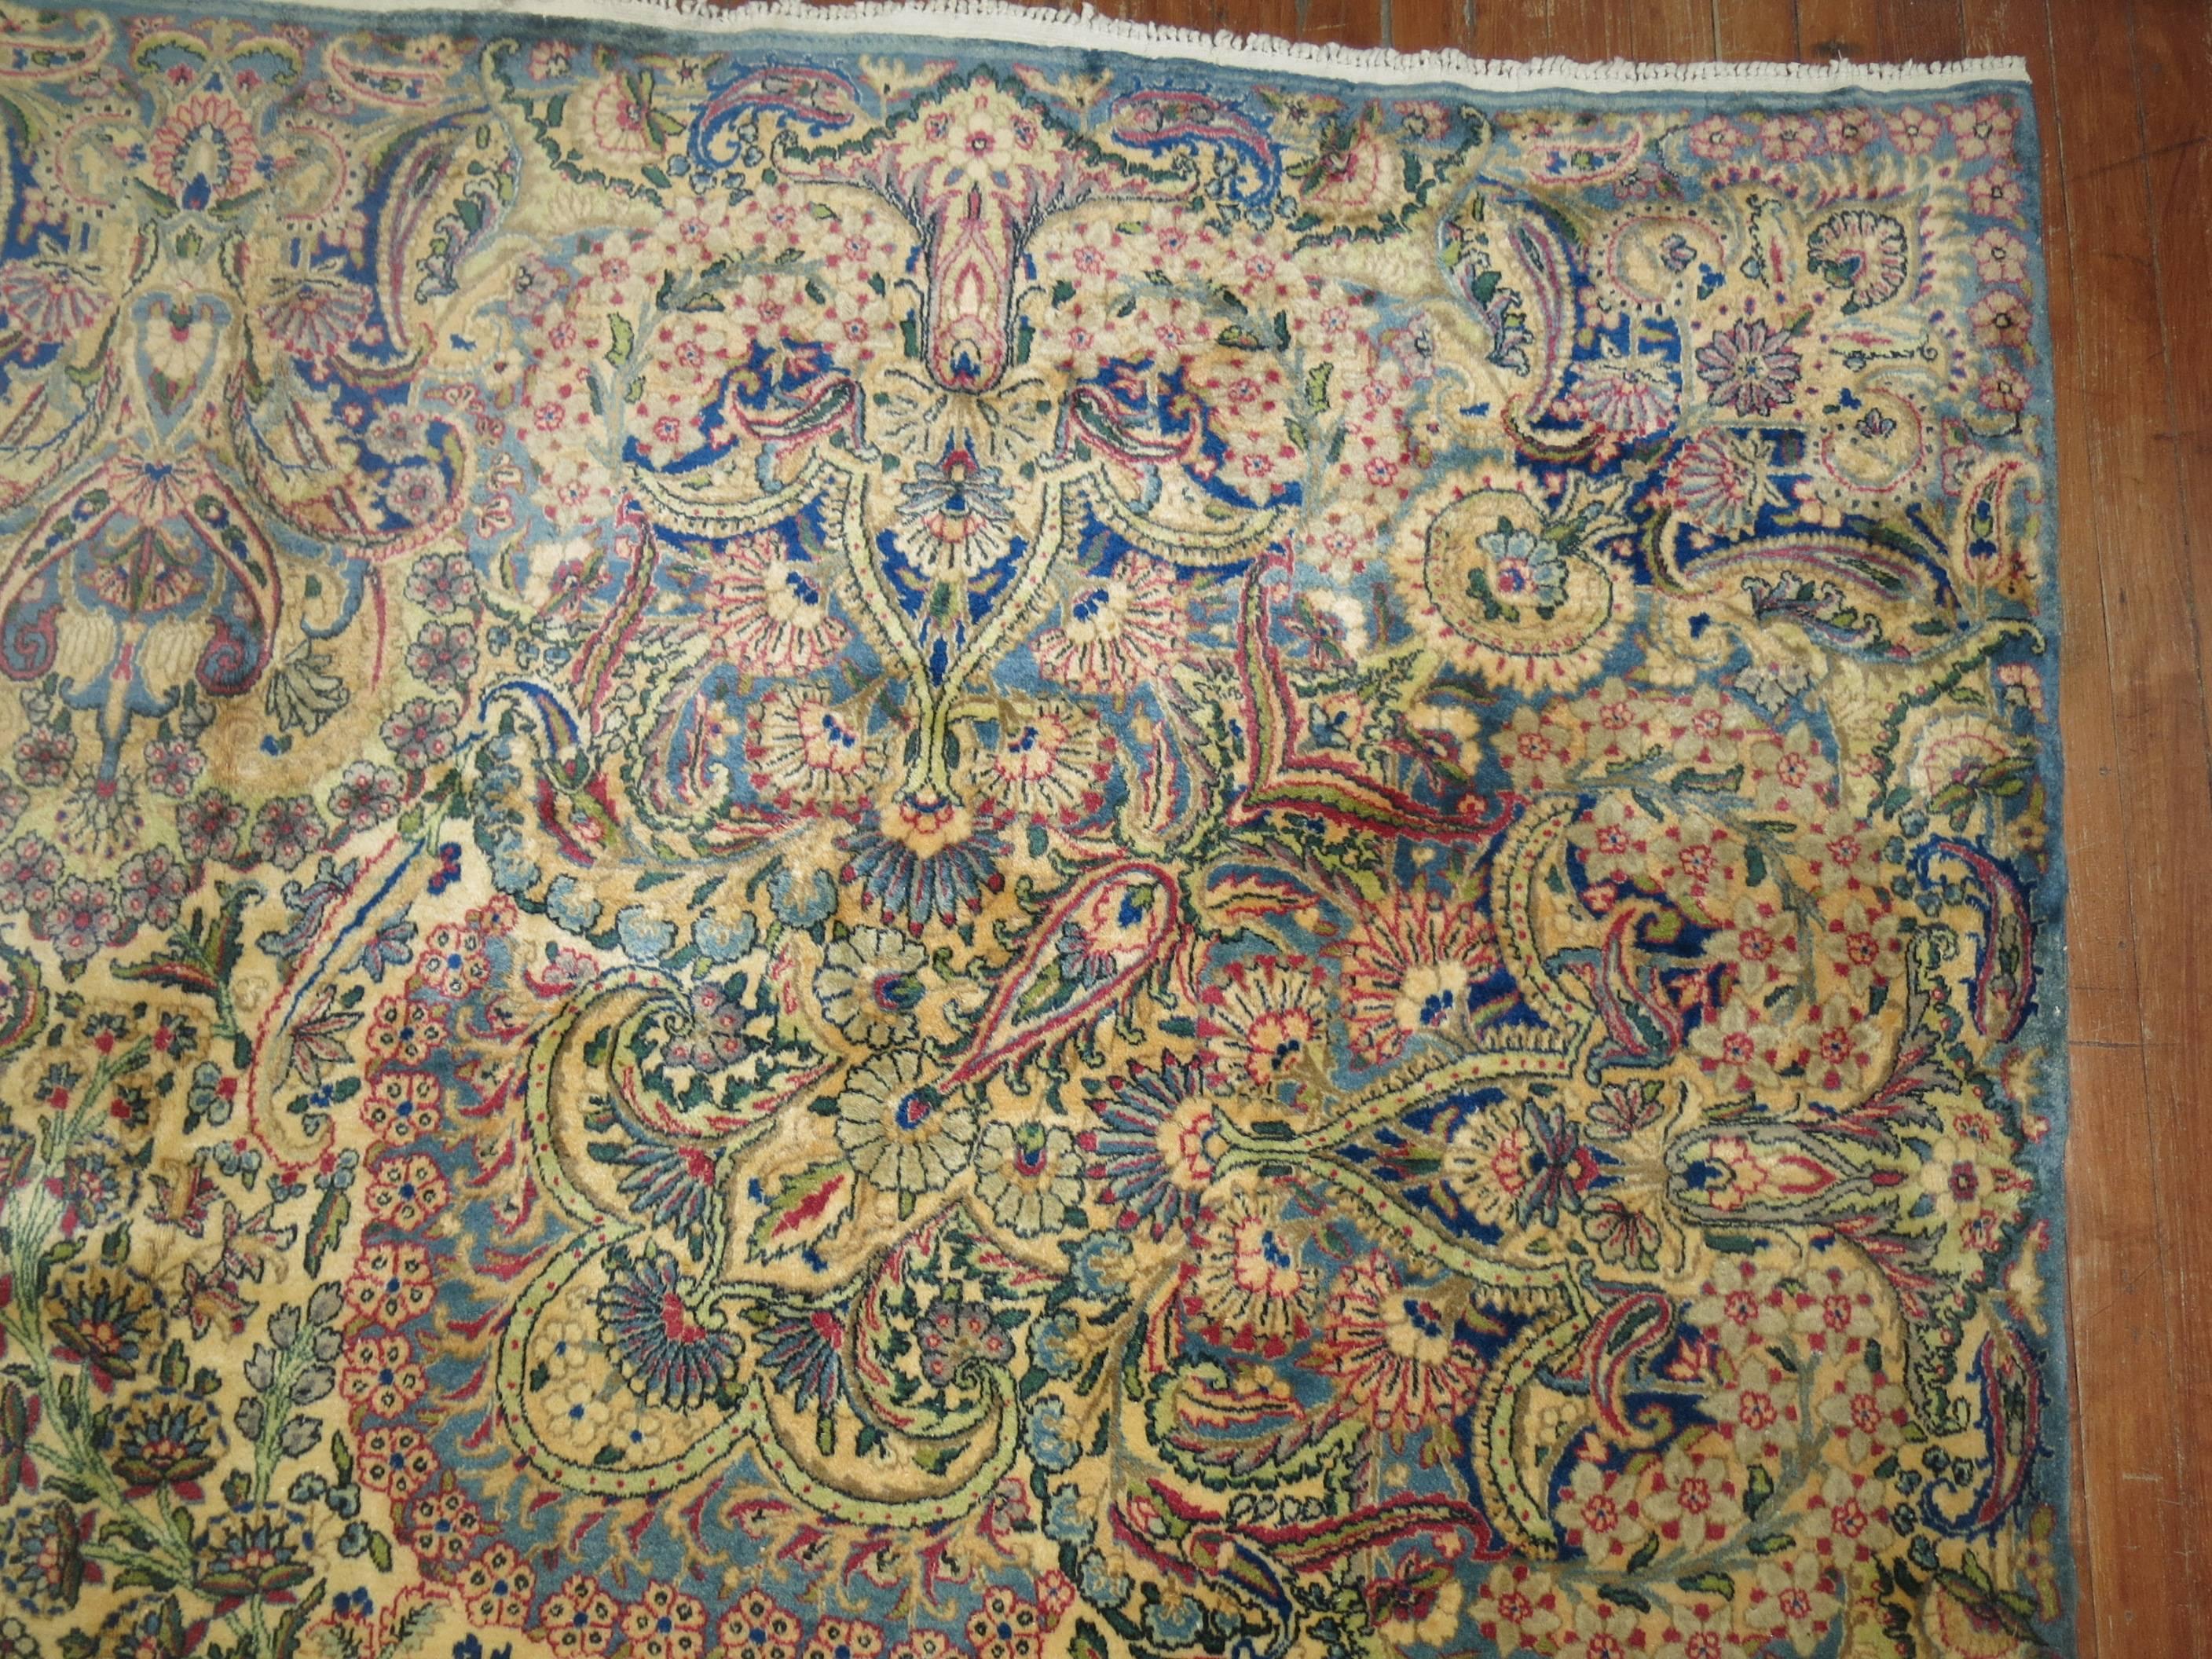 An incredible palace size earlier 20th century Kermanshah rug in predominant blues, gray and raspberry. Woven with the finest of Manchester wool.

Measures: 11'8'' x 21'8''

Kirman was a very important weaving centre dating from the Golden Age